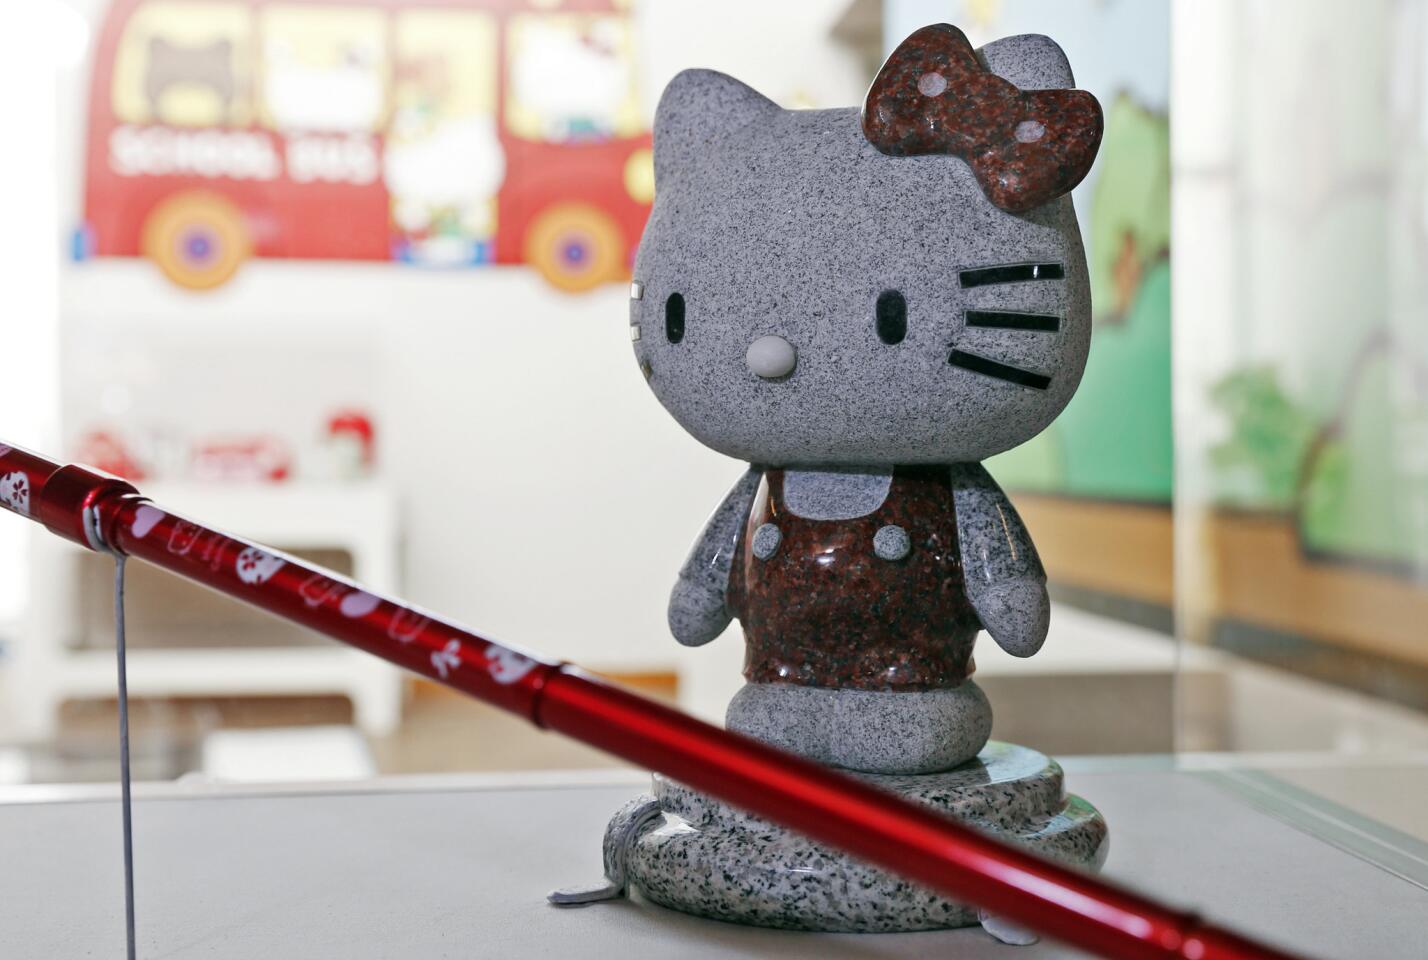 A look at 'Hello! Exploring the Supercute World of Hello Kitty'